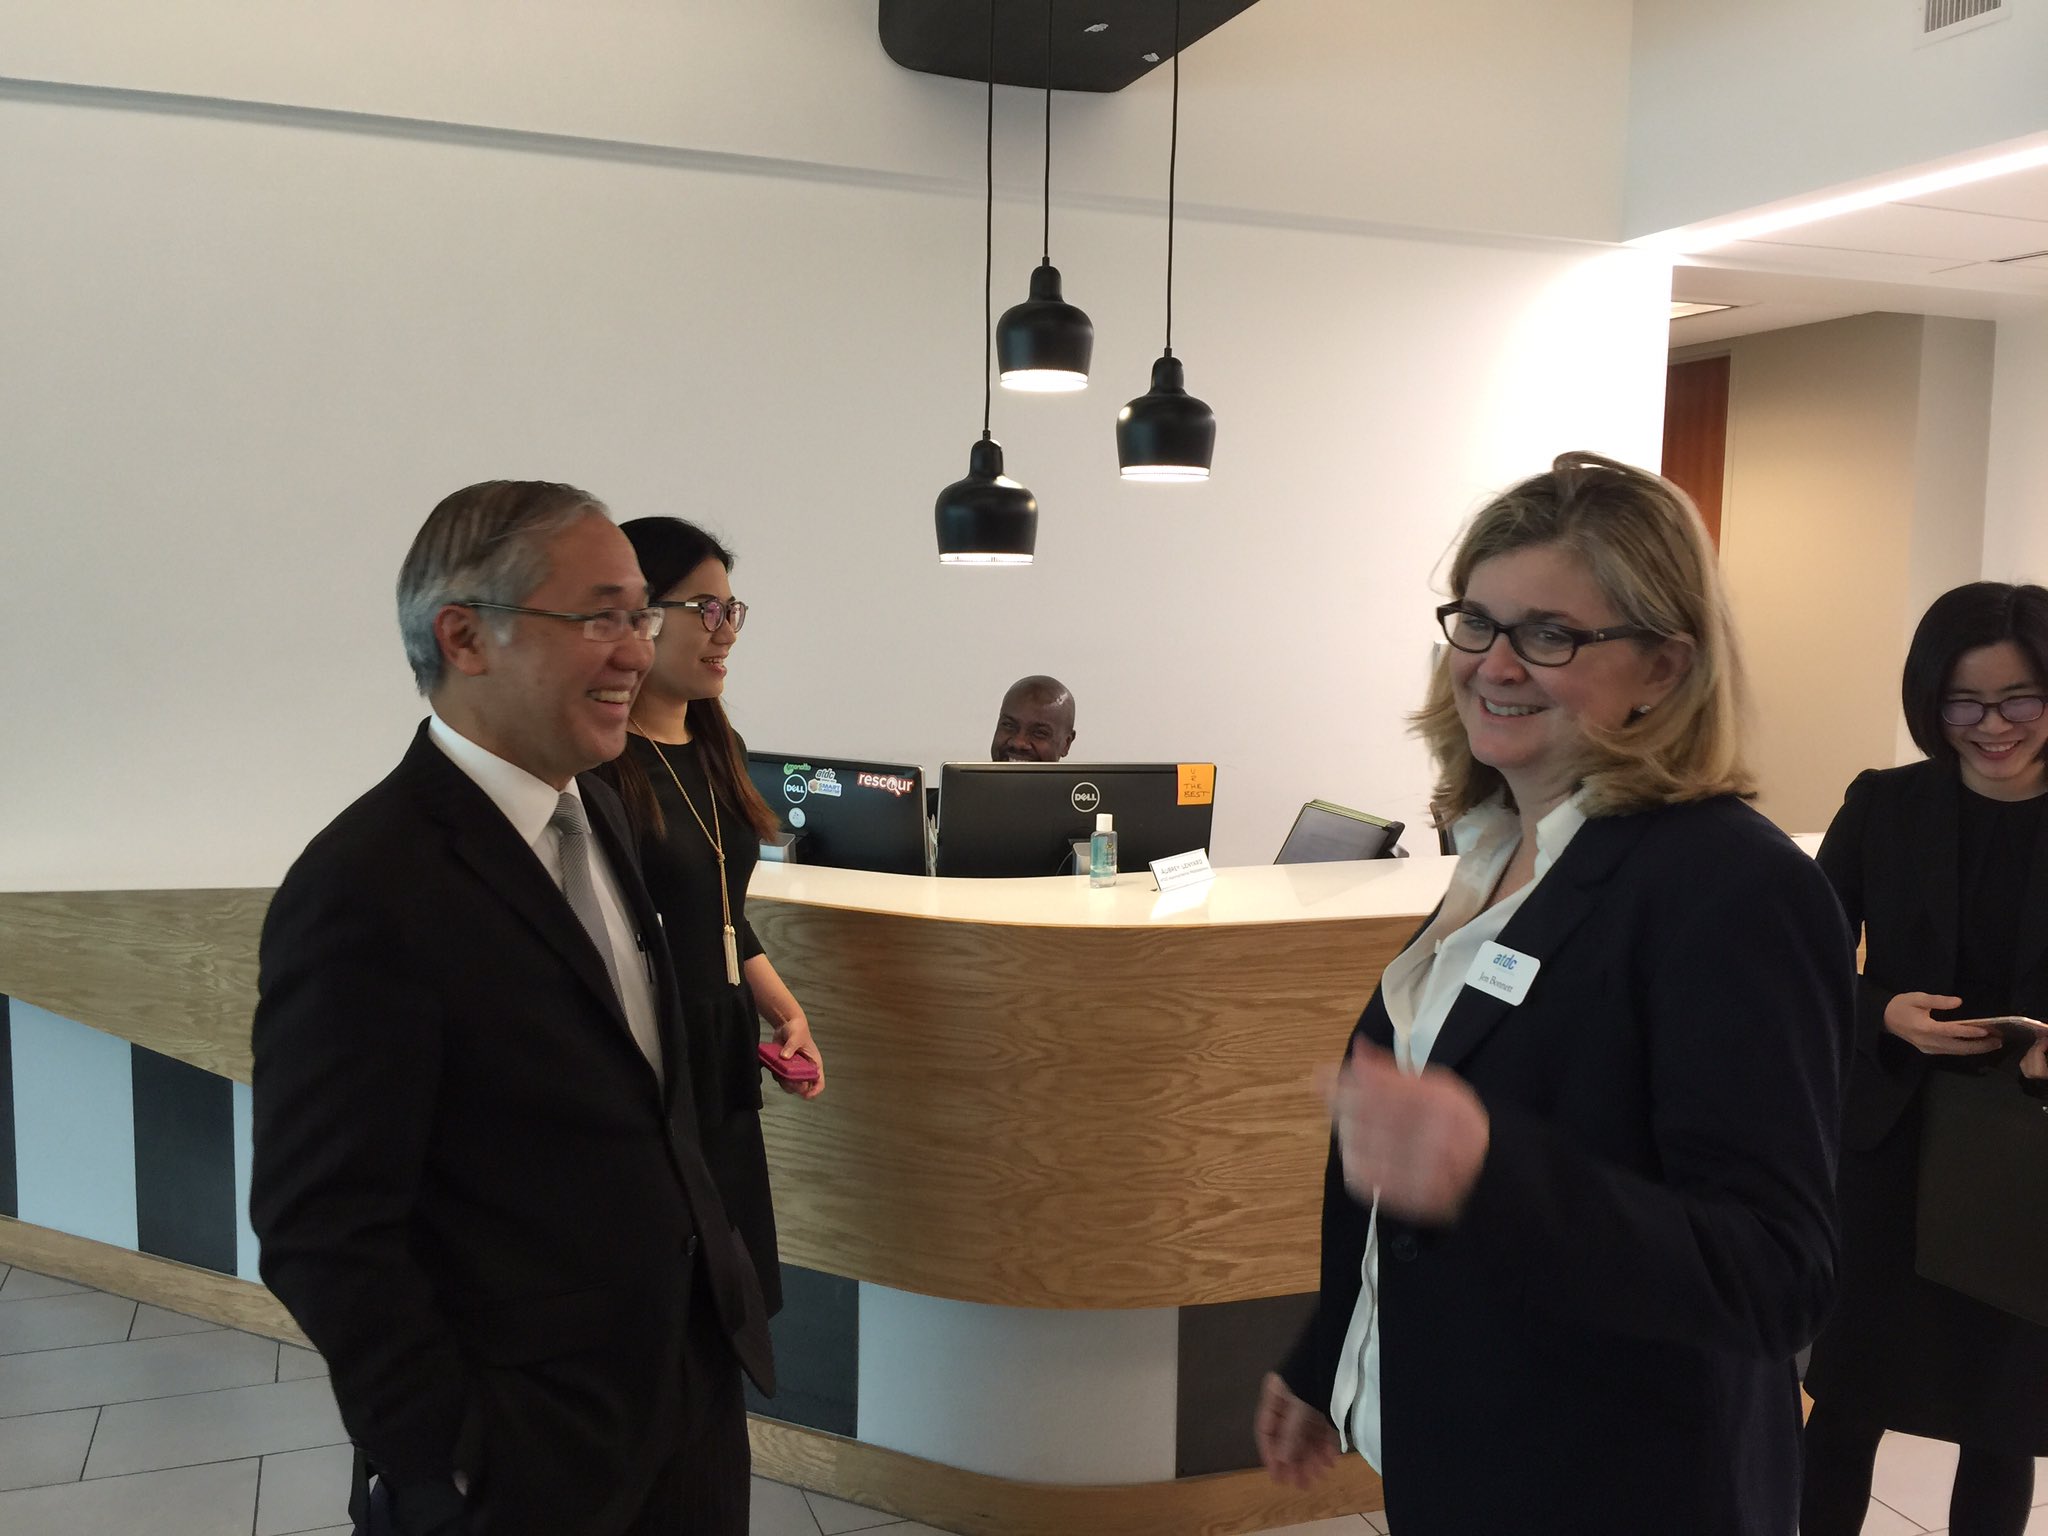 Pisan Manawapat (left), the Kingdom of Thailand’s ambassador to the United States, shares a laugh with Jen Bonnett, general manager of the Advanced Technology Development Center. The ambassador came to Georgia Tech March 24, 2017 to learn about ATDC's best practices. (Photo credit: Péralte C. Paul)